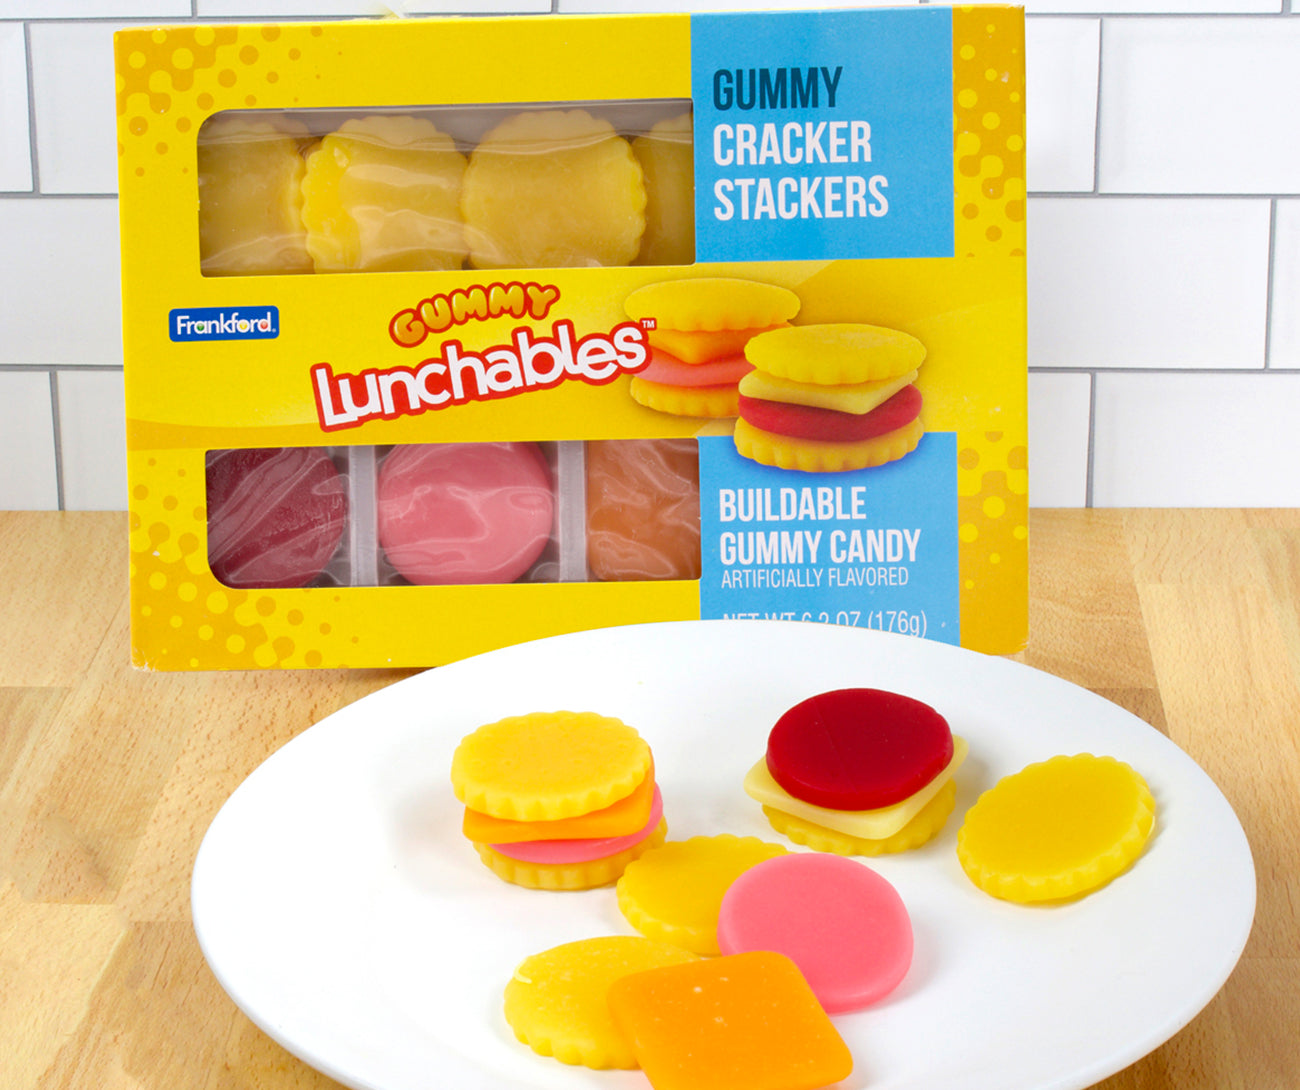 Yellow lunchables box with plate of gummy cracker stacks